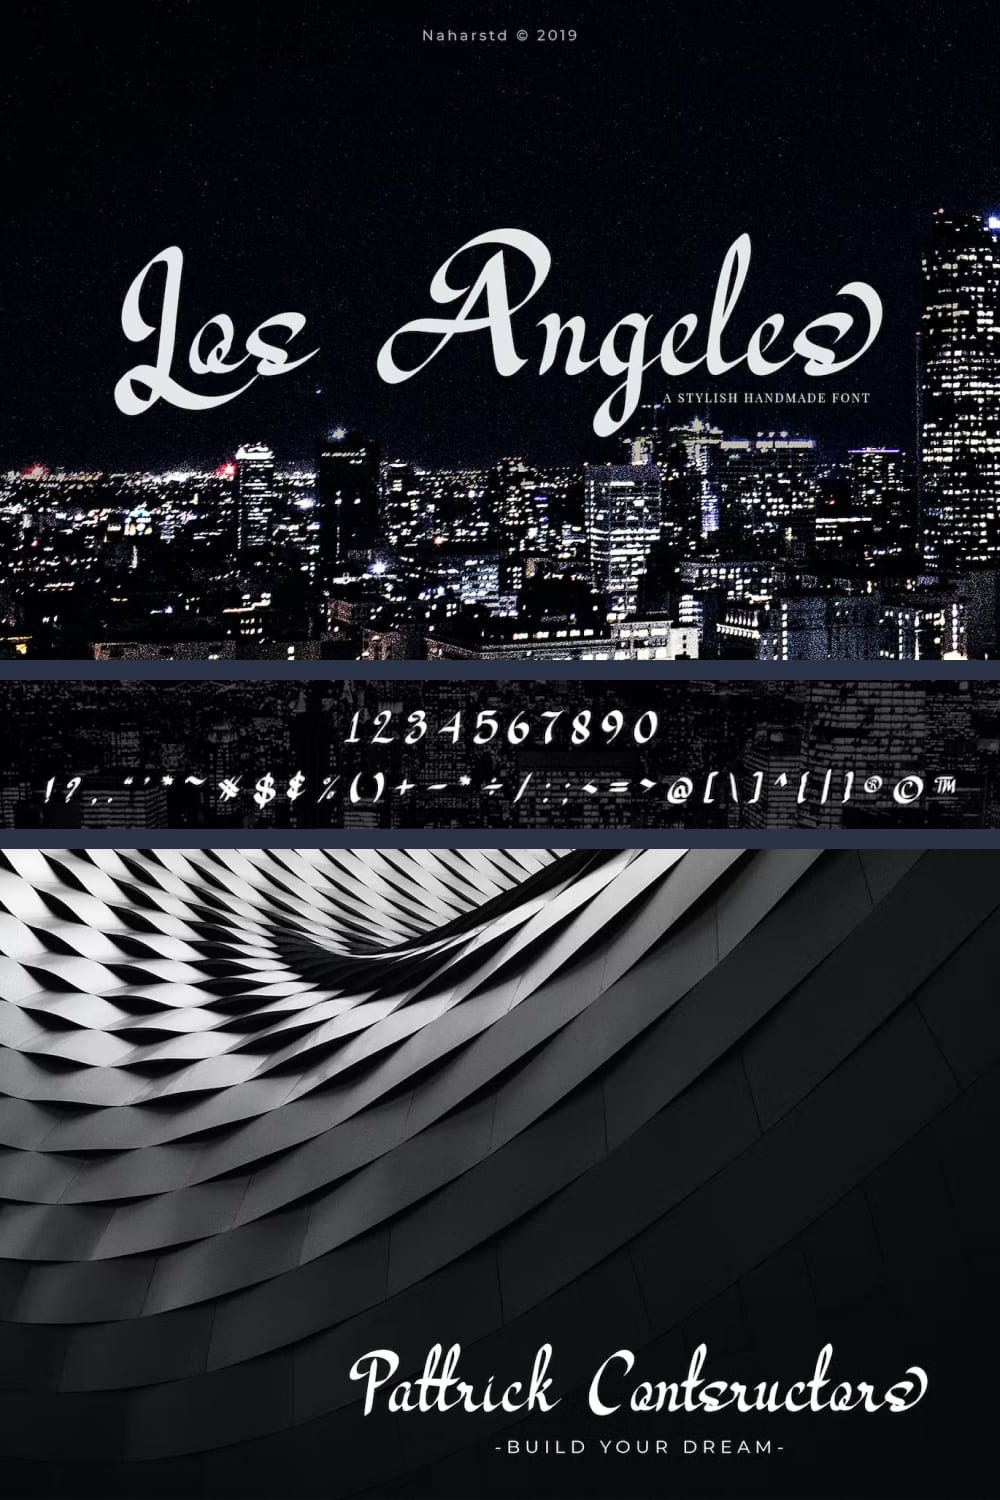 An example of a font in white against the background of a night city.